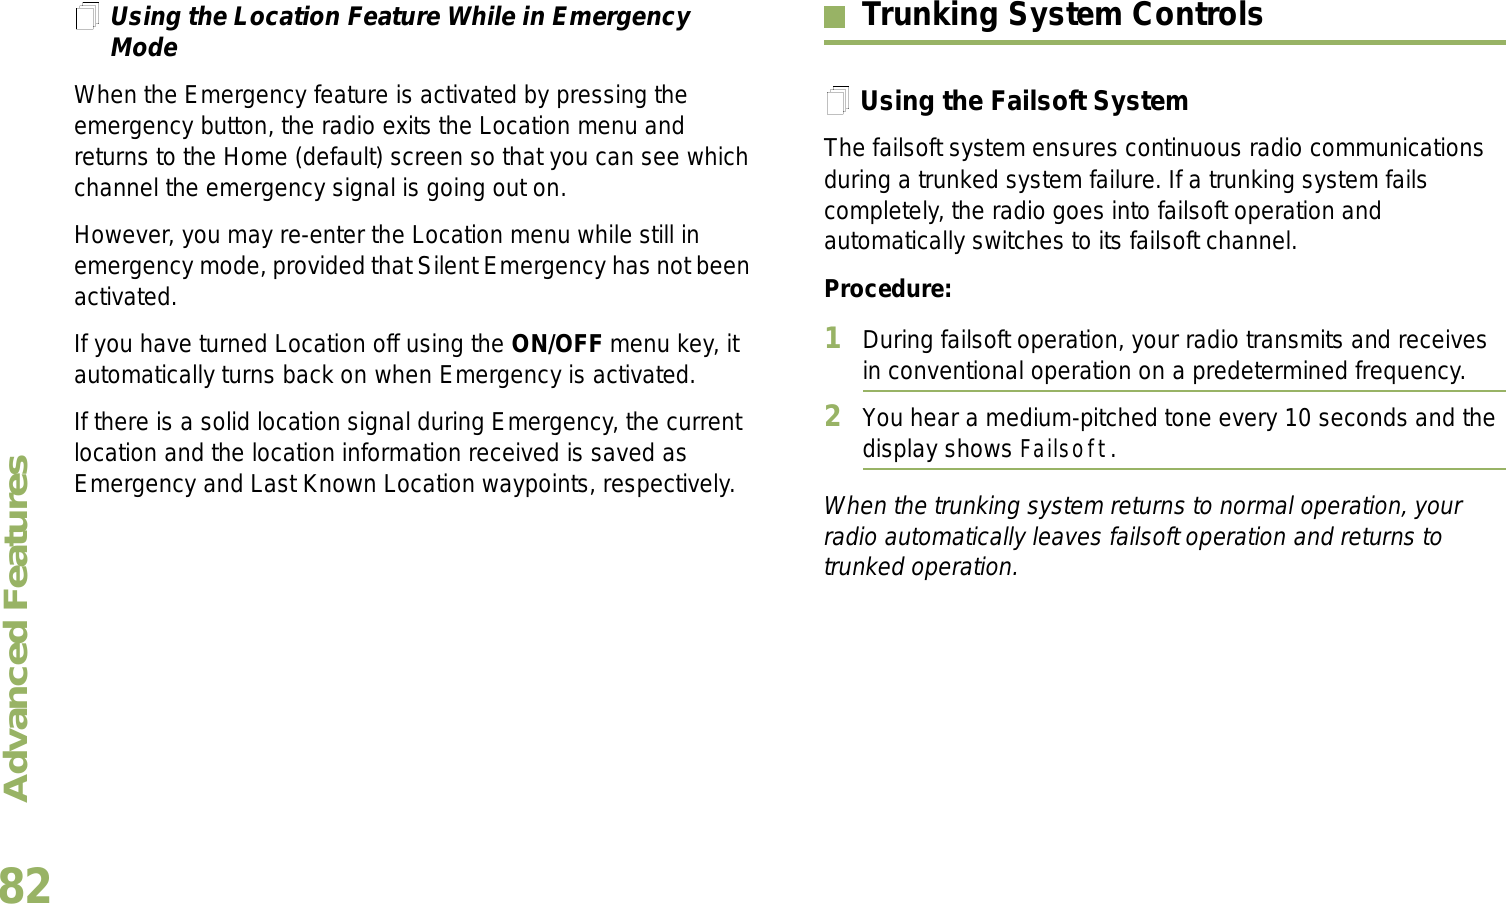 Advanced FeaturesEnglish82Using the Location Feature While in Emergency ModeWhen the Emergency feature is activated by pressing the emergency button, the radio exits the Location menu and returns to the Home (default) screen so that you can see which channel the emergency signal is going out on.However, you may re-enter the Location menu while still in emergency mode, provided that Silent Emergency has not been activated.If you have turned Location off using the ON/OFF menu key, it automatically turns back on when Emergency is activated. If there is a solid location signal during Emergency, the current location and the location information received is saved as Emergency and Last Known Location waypoints, respectively.Trunking System ControlsUsing the Failsoft SystemThe failsoft system ensures continuous radio communications during a trunked system failure. If a trunking system fails completely, the radio goes into failsoft operation and automatically switches to its failsoft channel.Procedure:1During failsoft operation, your radio transmits and receives in conventional operation on a predetermined frequency.2You hear a medium-pitched tone every 10 seconds and the display shows Failsoft.When the trunking system returns to normal operation, your radio automatically leaves failsoft operation and returns to trunked operation.